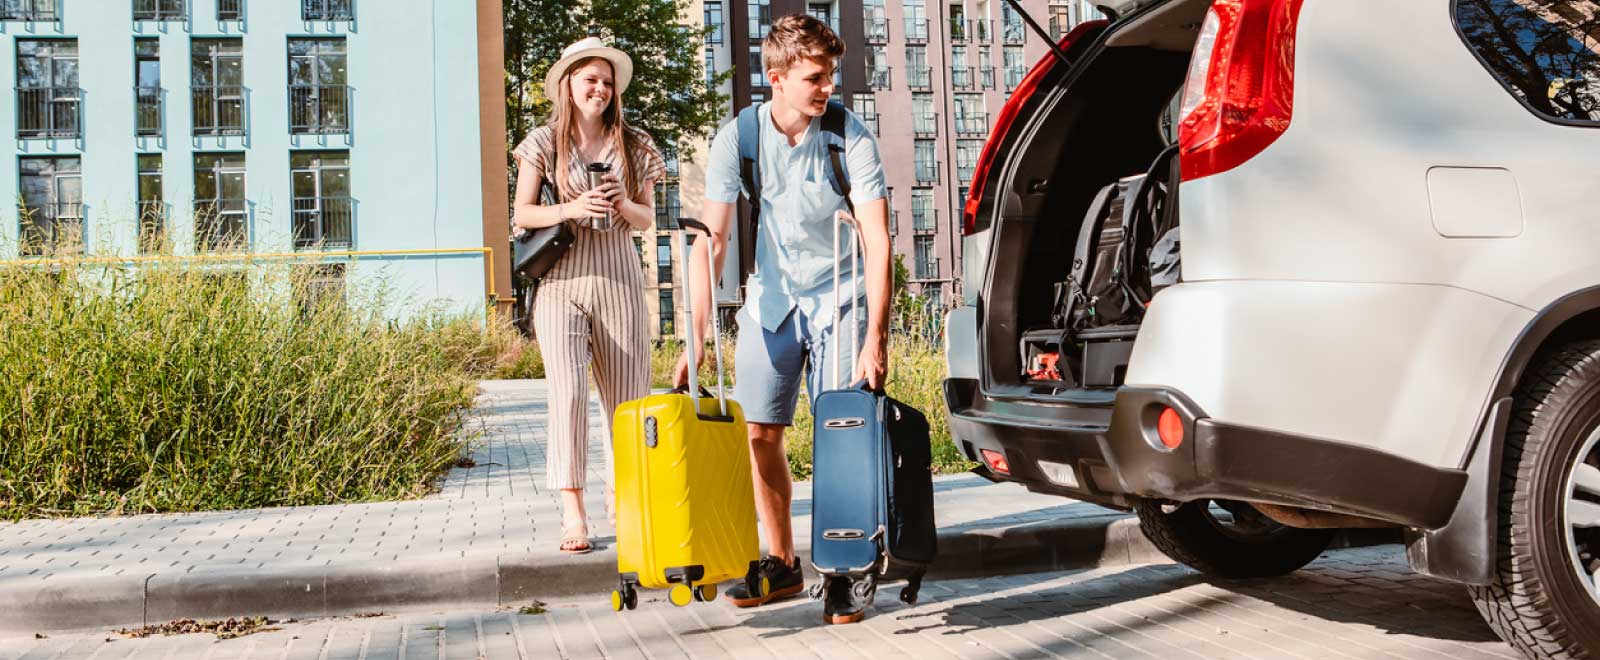 A girl standing on the sidewalk and a guy putting two suitcases into the trunk of a car.